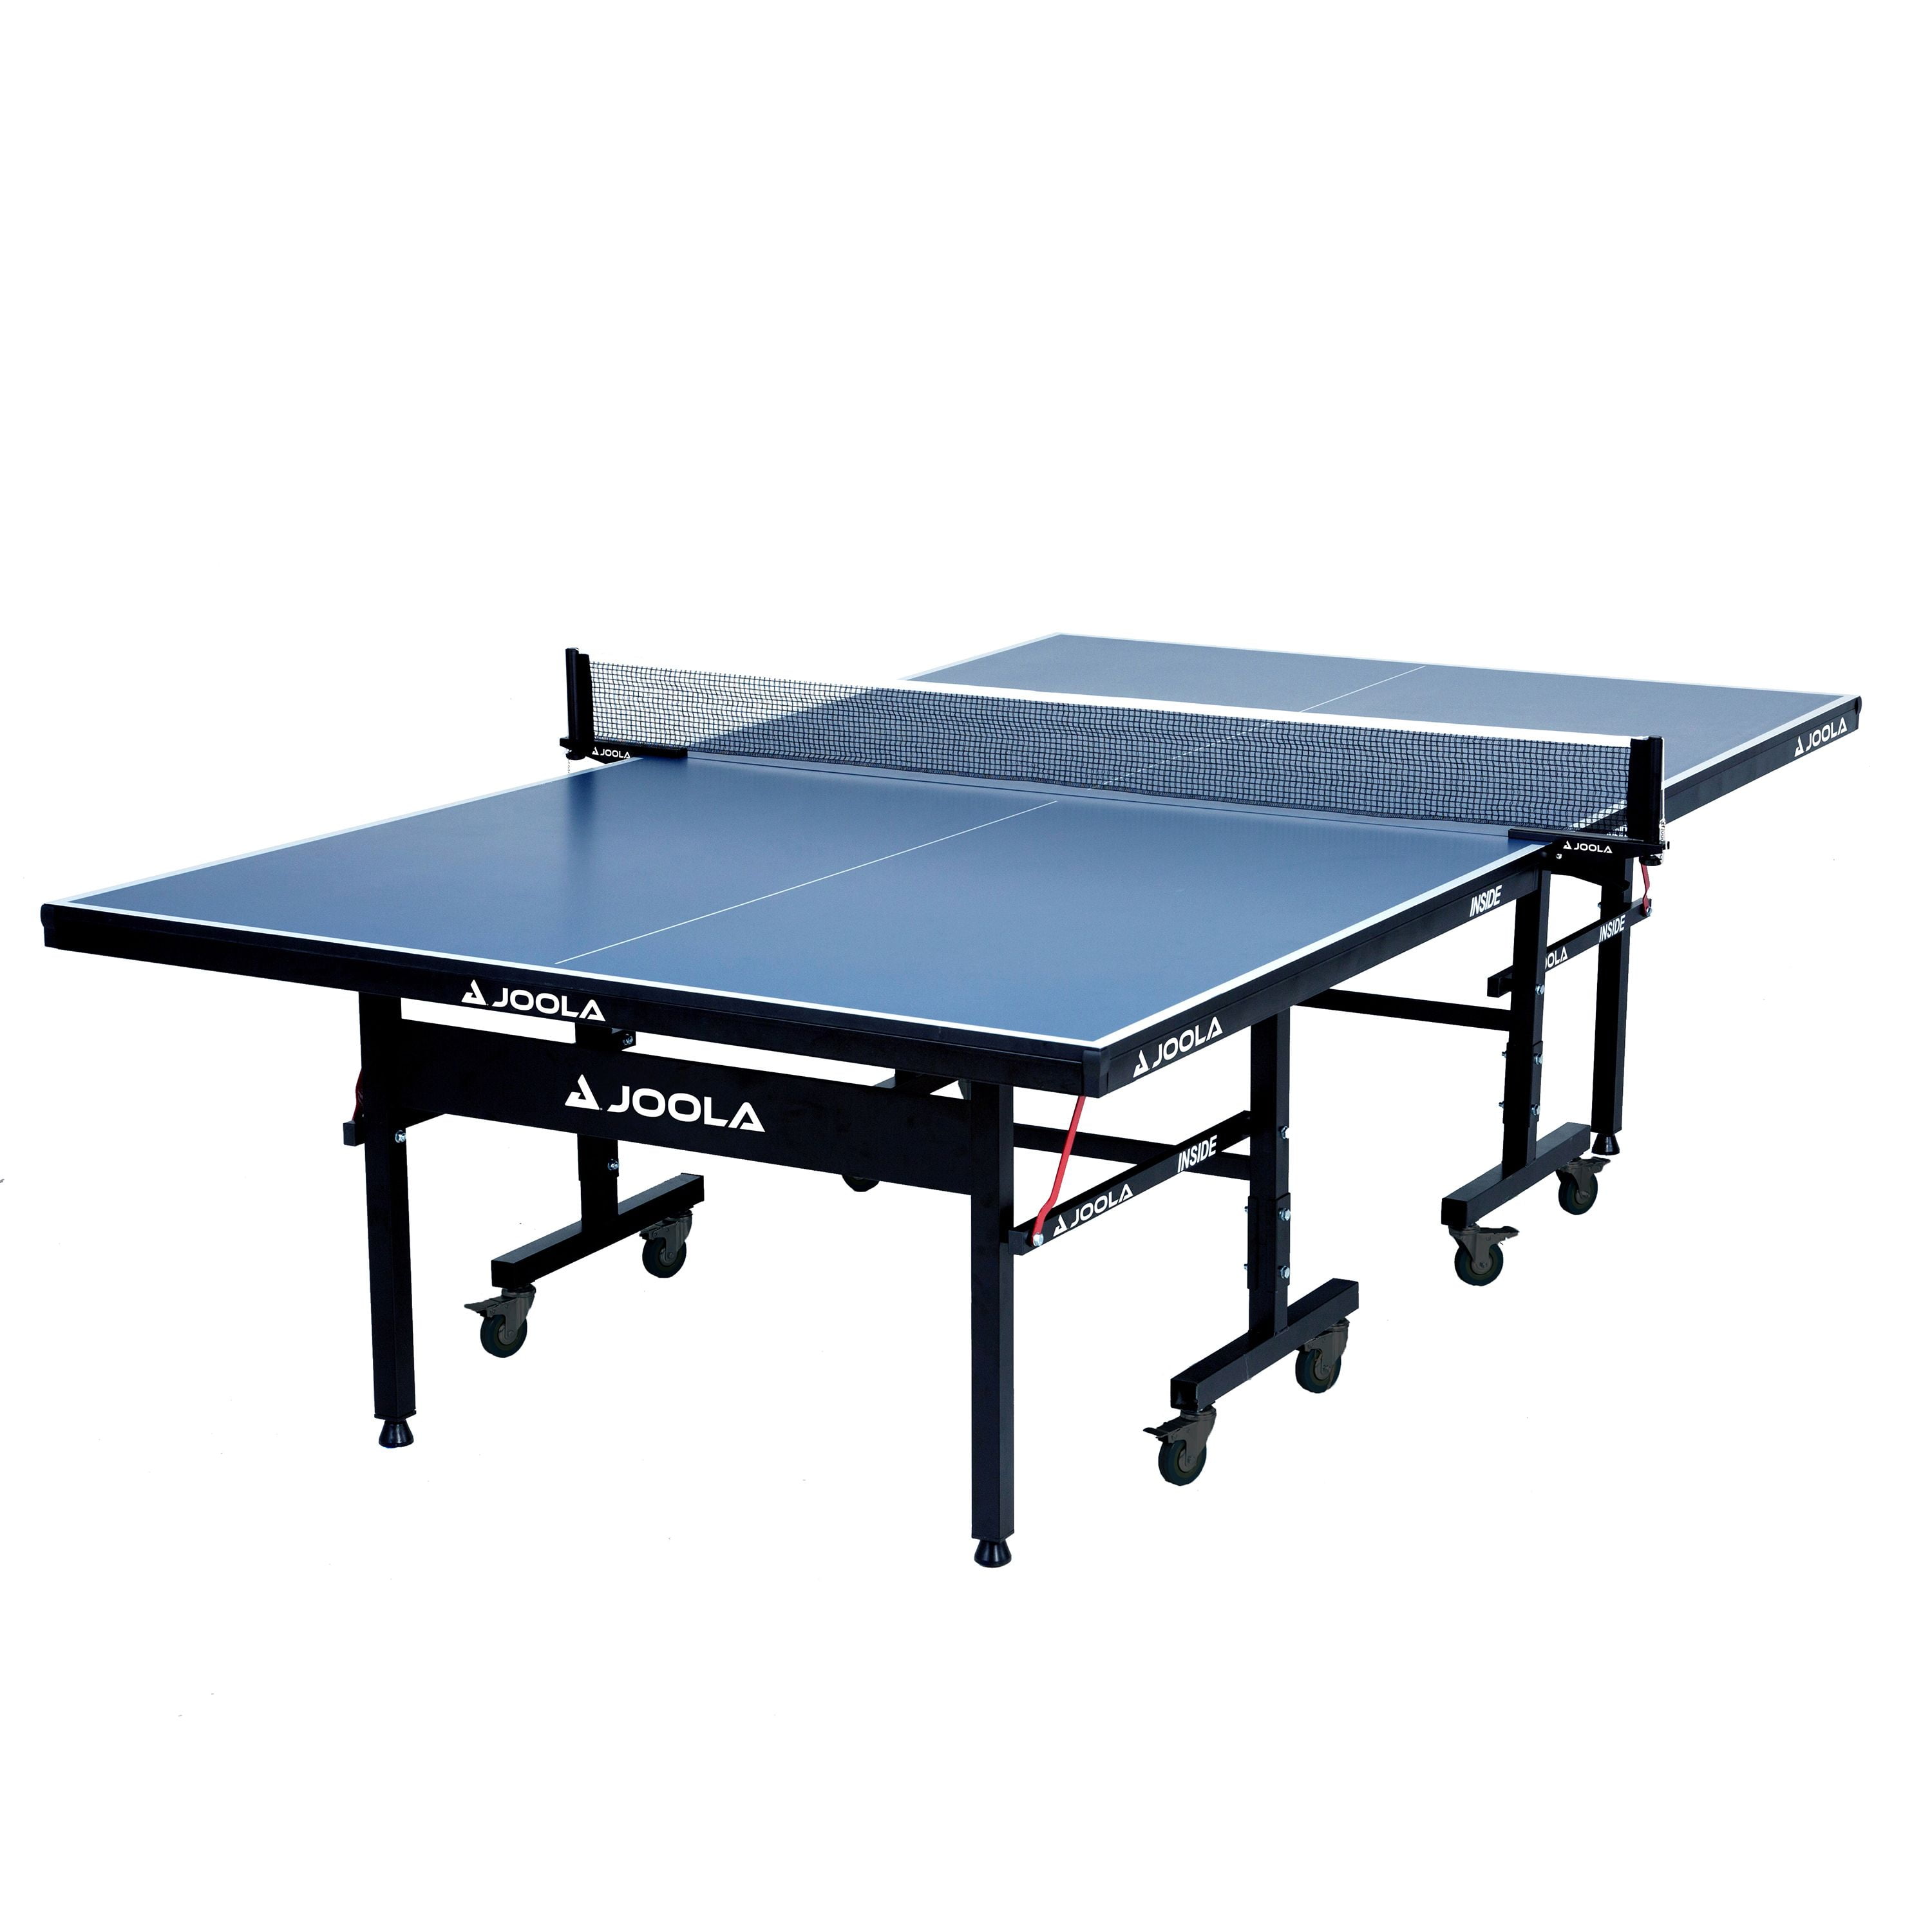 JOOLA Inside 18 Professional Table Tennis Table with Ping Pong Net Set, 9 x 5, Blue